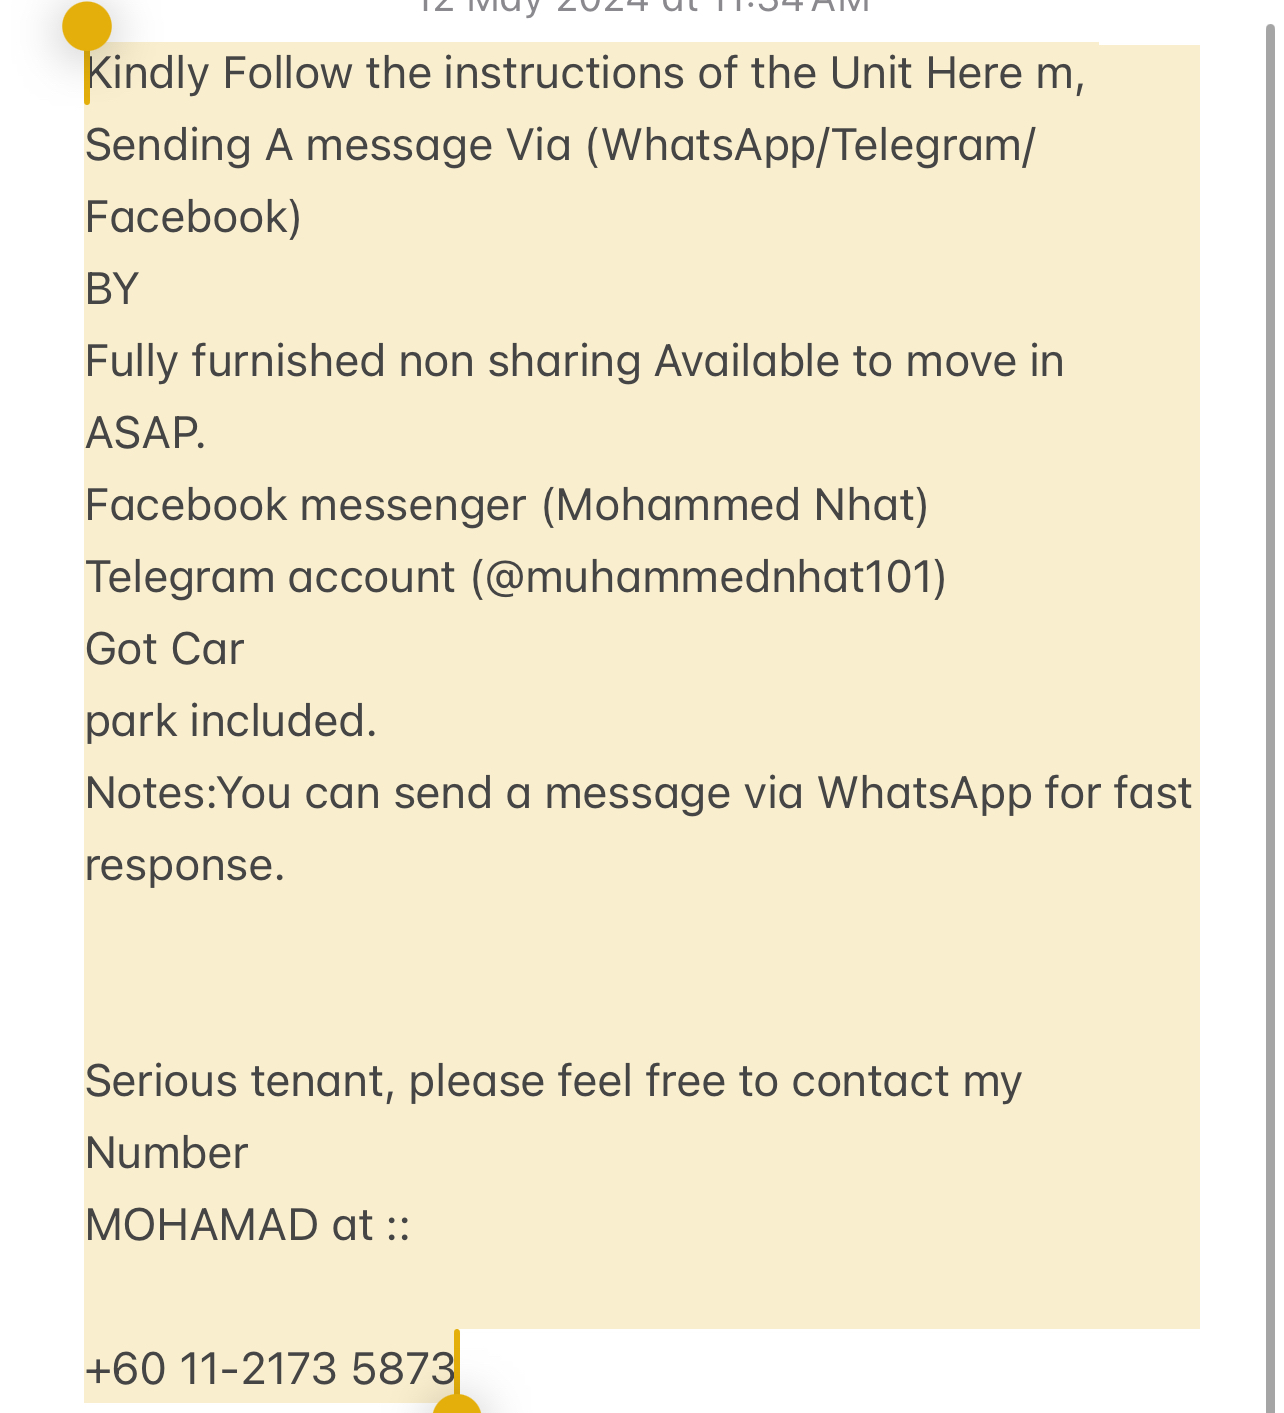 room for rent, single room, bayan lepas free industrial zone phase 1, Send the owner a message on WhatsApp/facebook if you want to RENT the unit facebook (Mohammed Nhat)&Telegram(@muhammednhat101) Fully furnished non sharing :(comfortable)